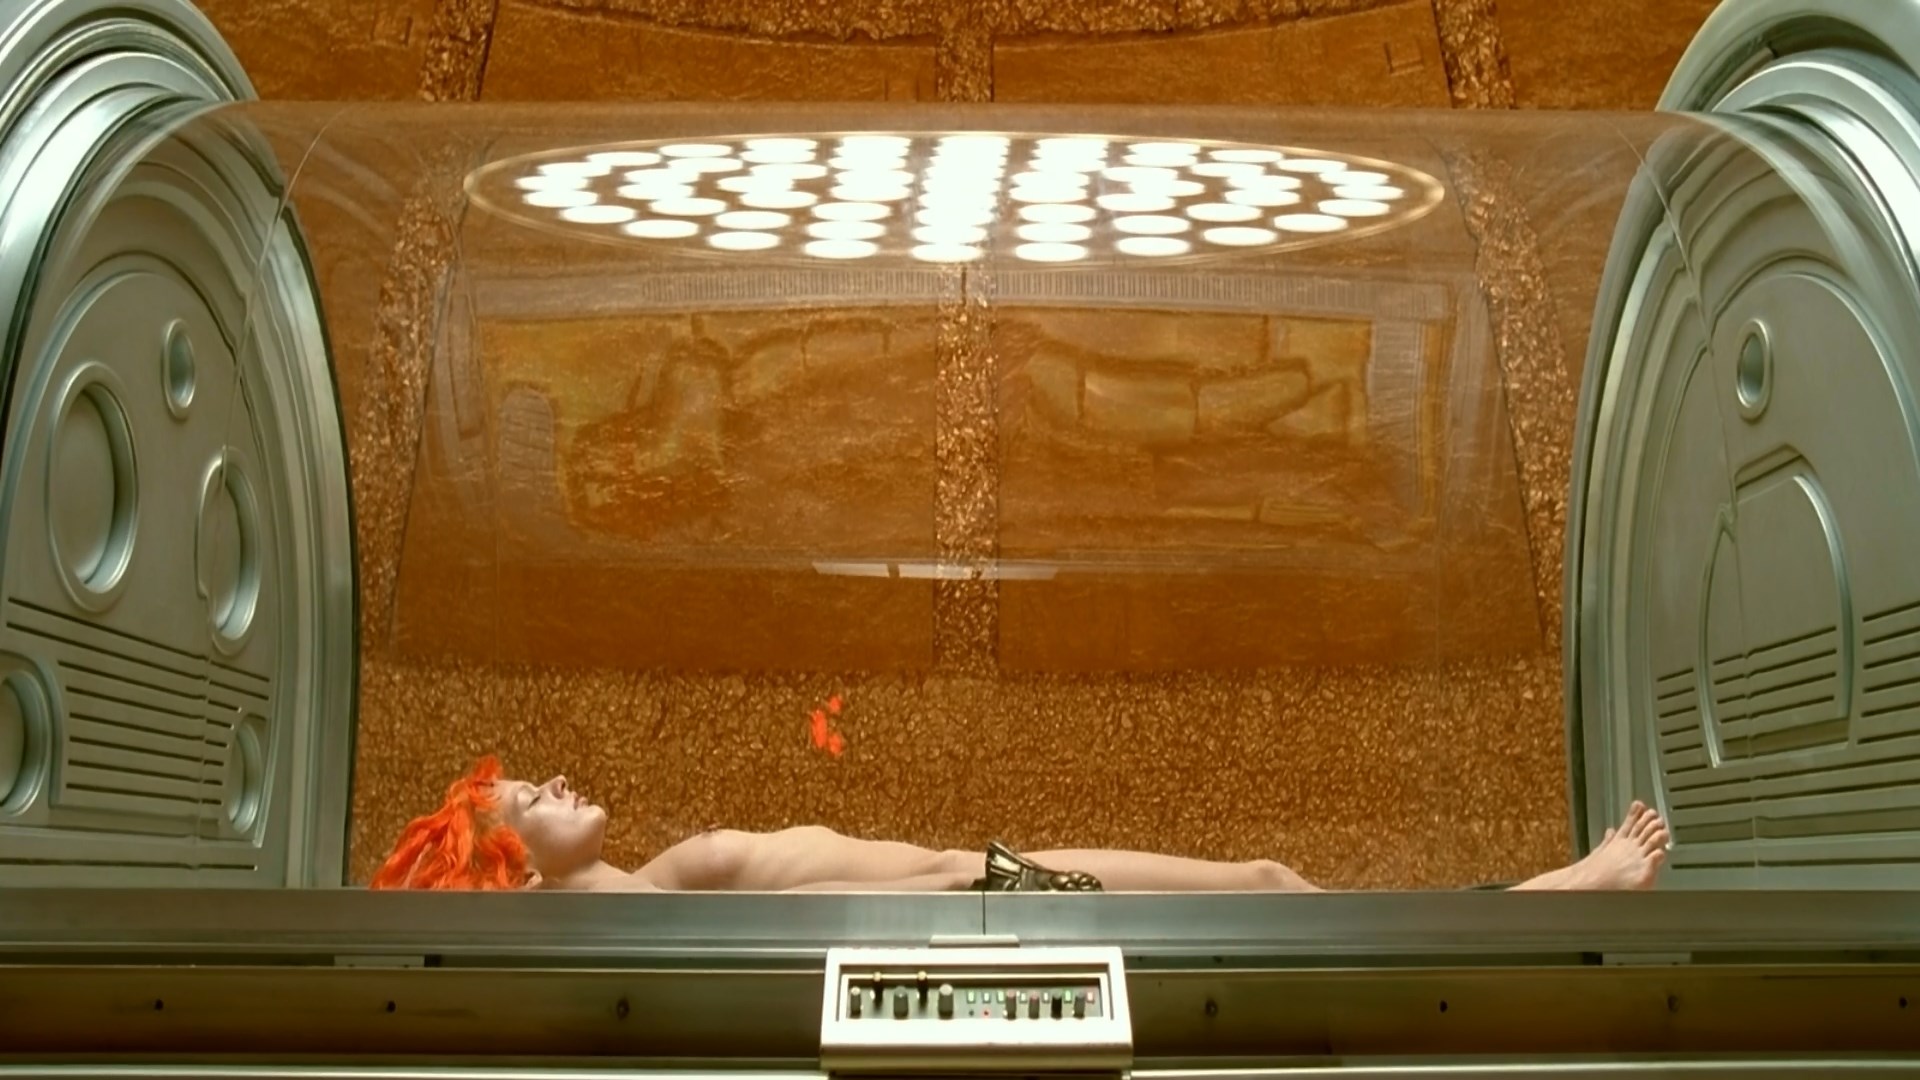 Fifth Element sex scene, The Fifth Element nude scene, The Fifth ...